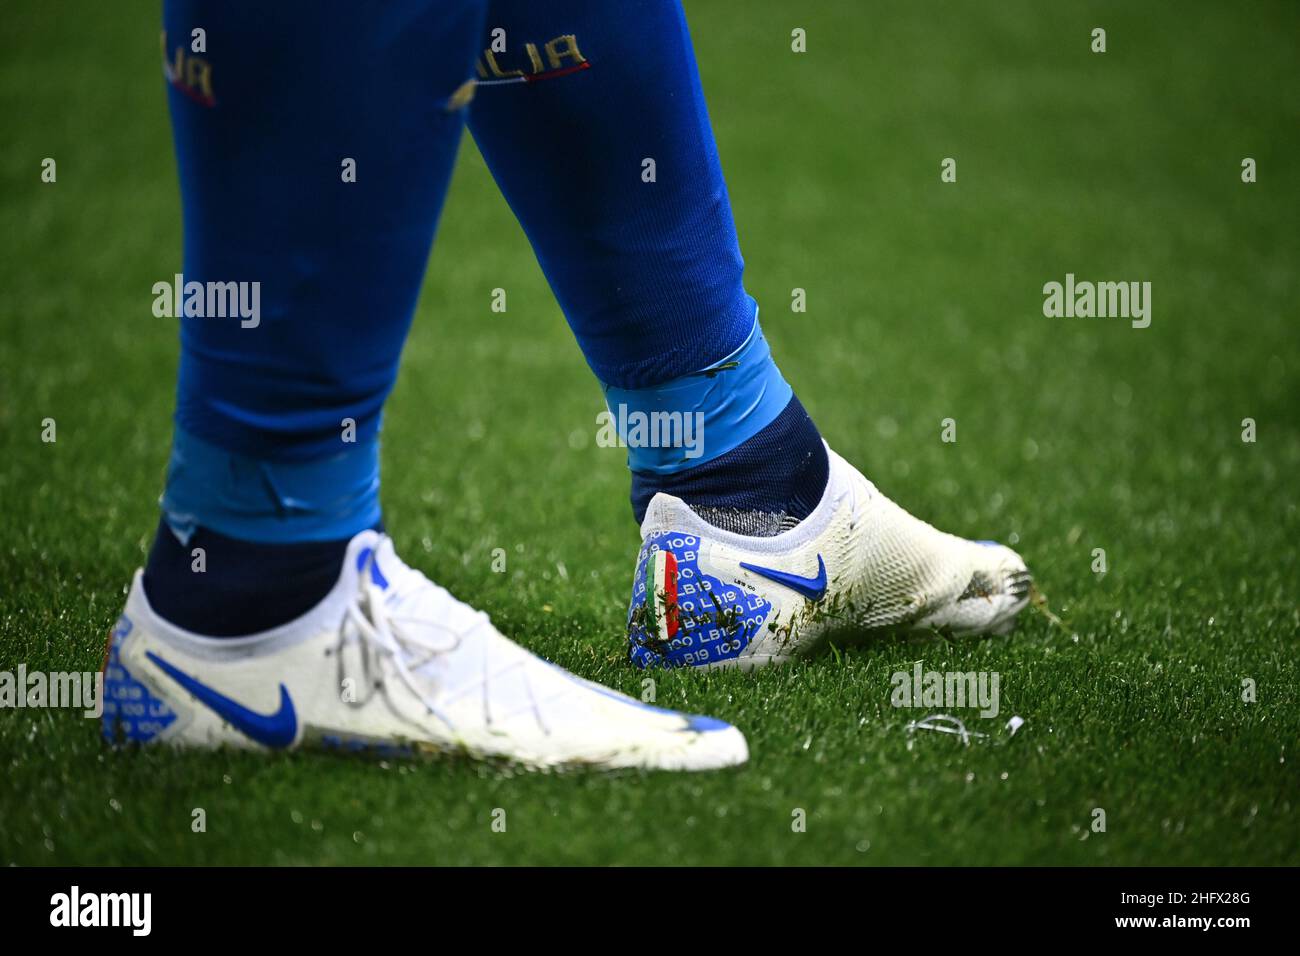 Fifa world cup italia hi-res stock photography and images - Alamy